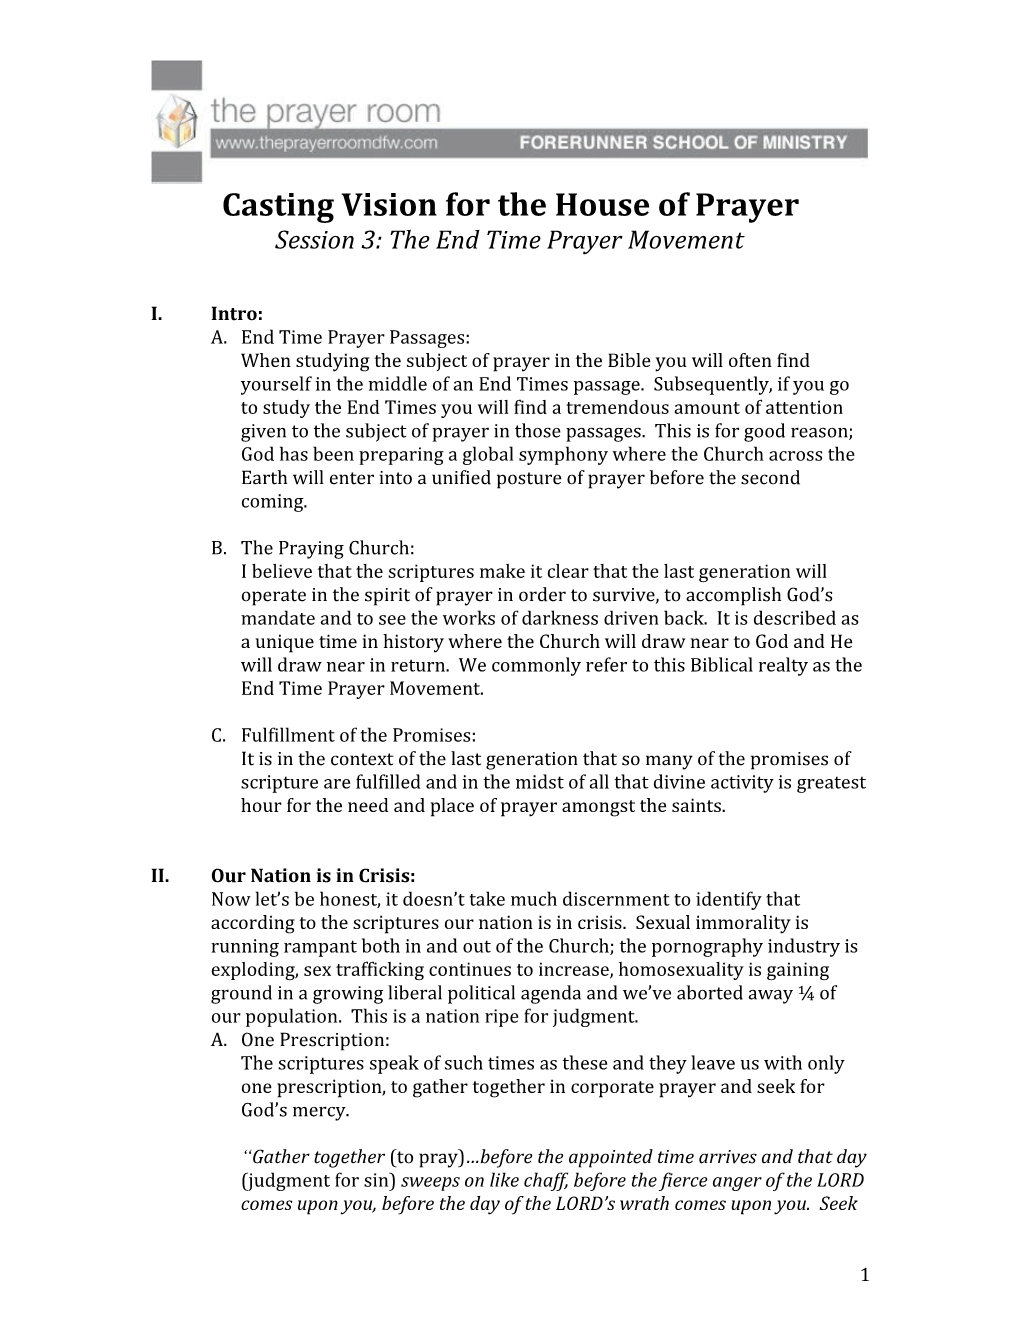 Casting Vision for the House of Prayer